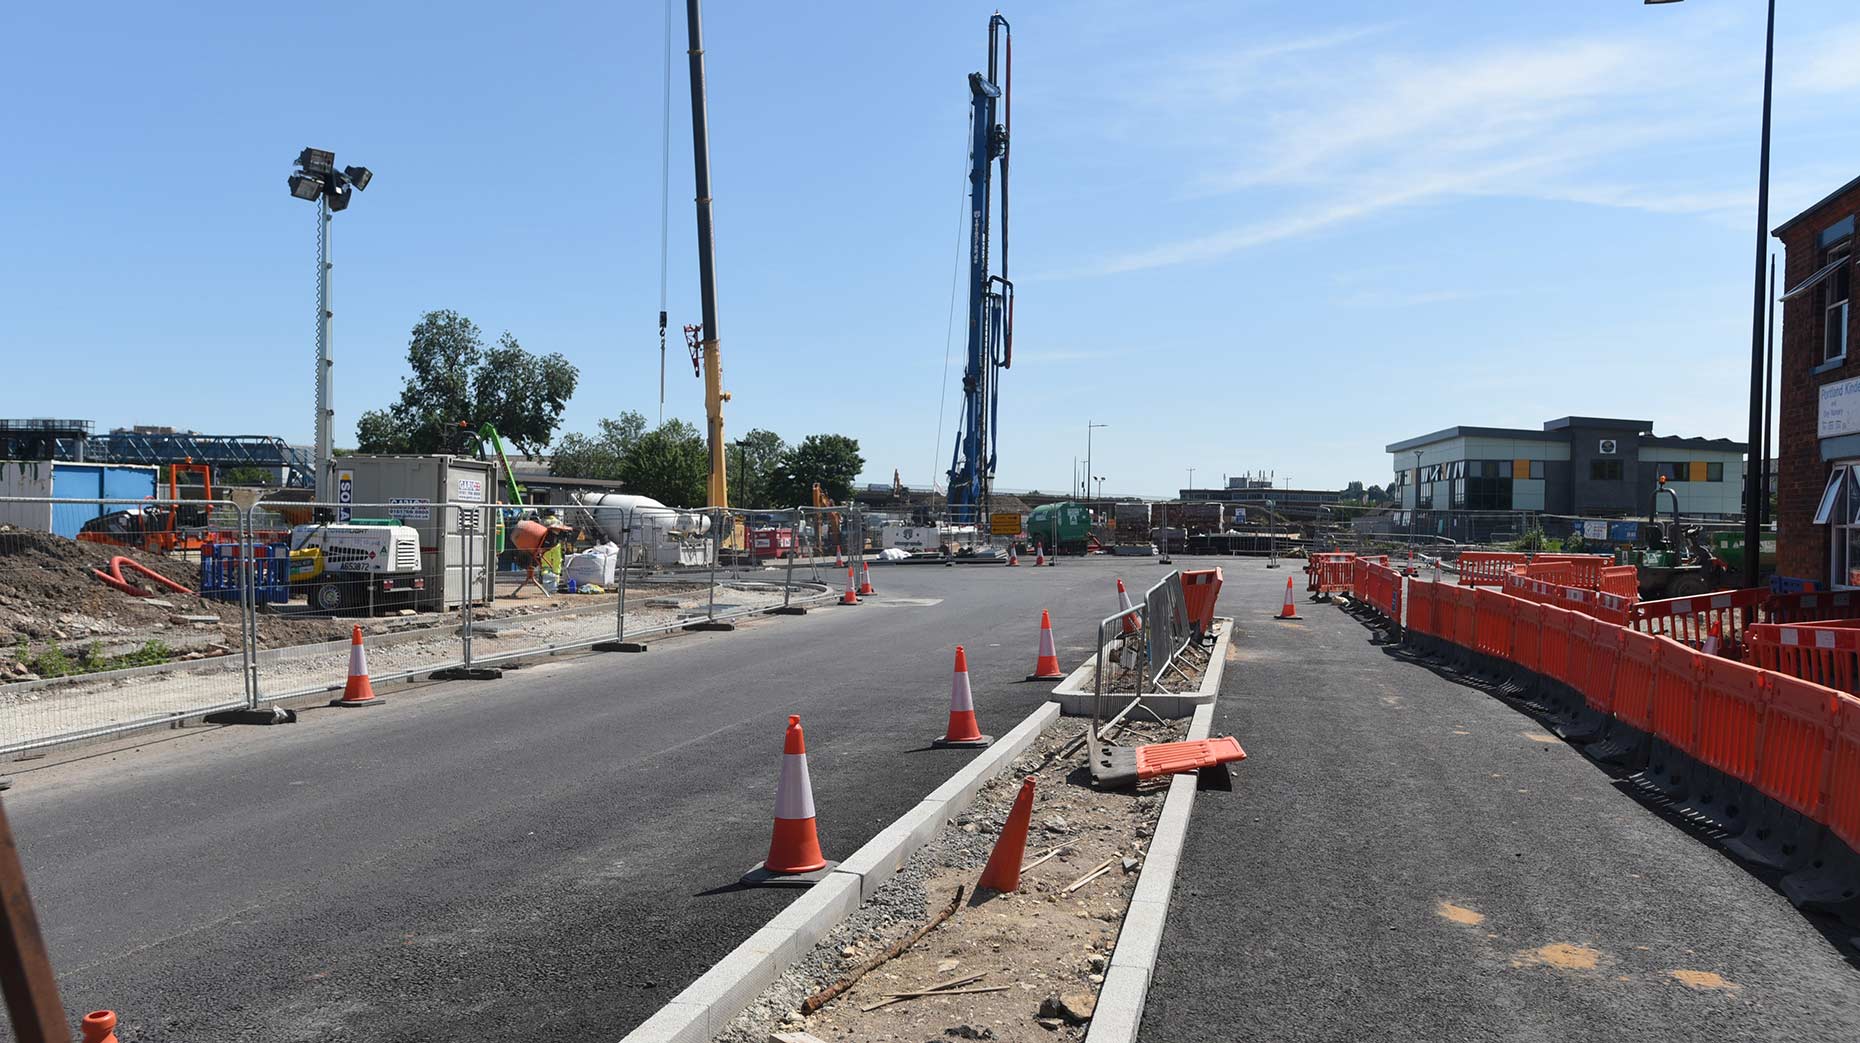 The first section of the East West Link Road can now be seen. Photo: Steve Smailes for The Lincolnite